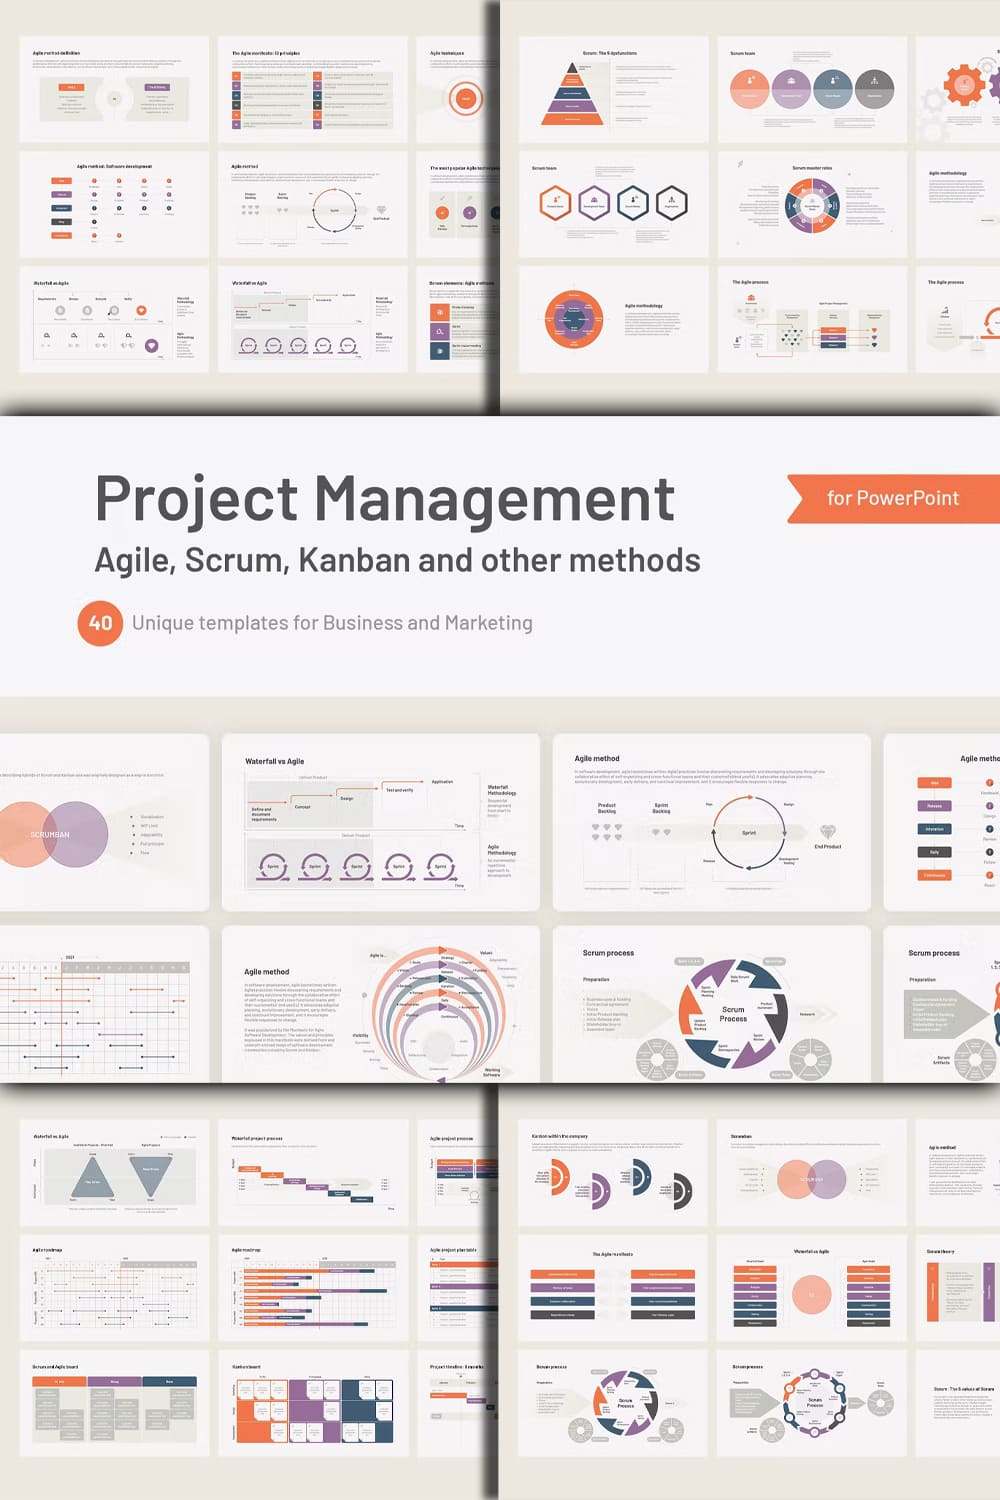 Project management for powerpoint - pinterest image preview.